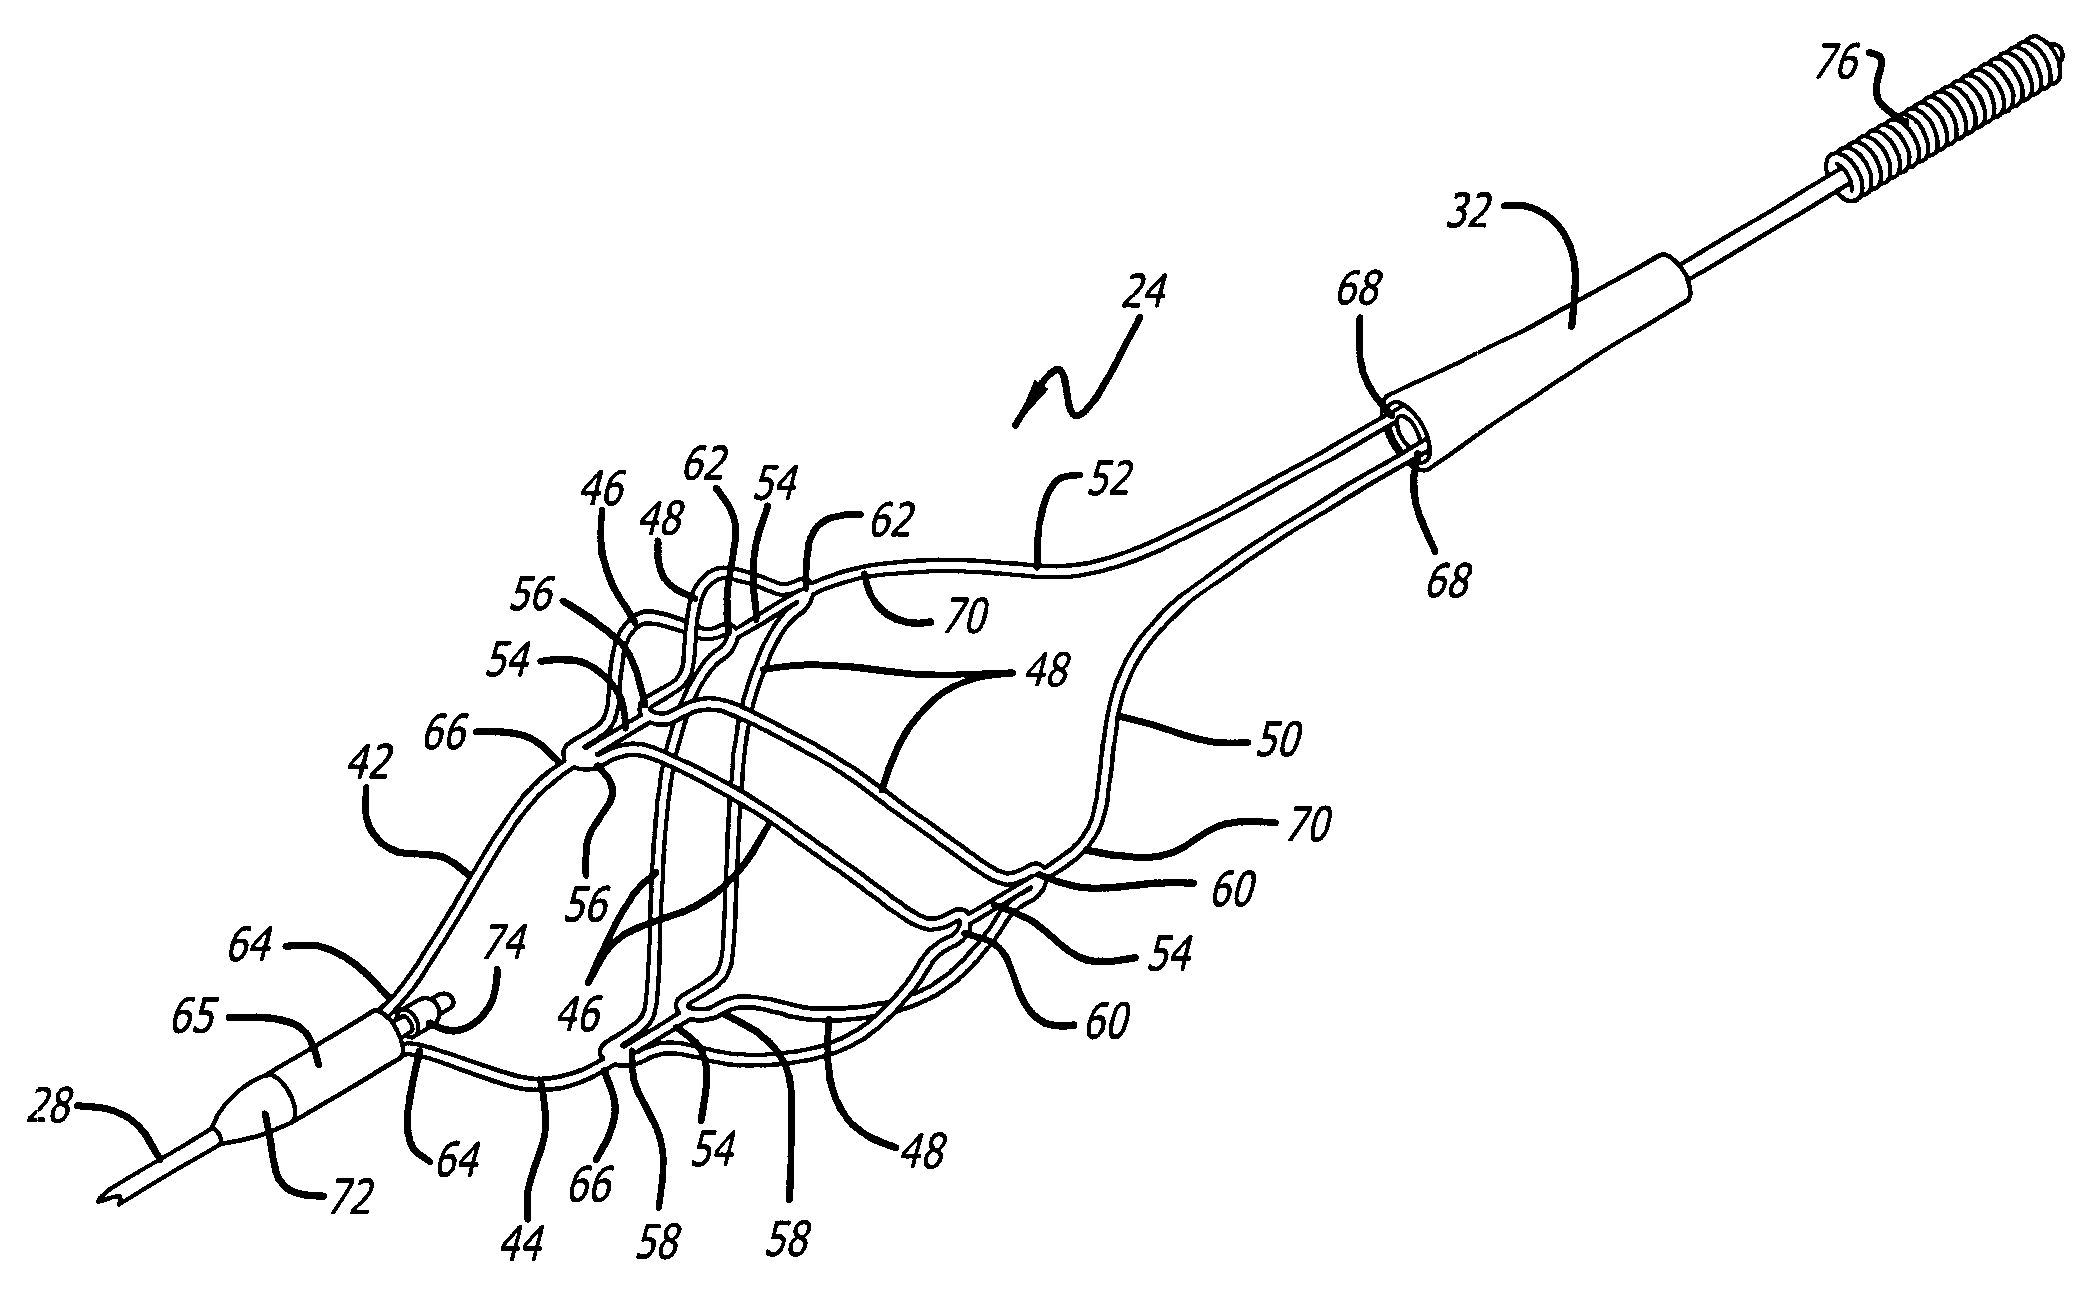 Flexible and conformable embolic filtering devices